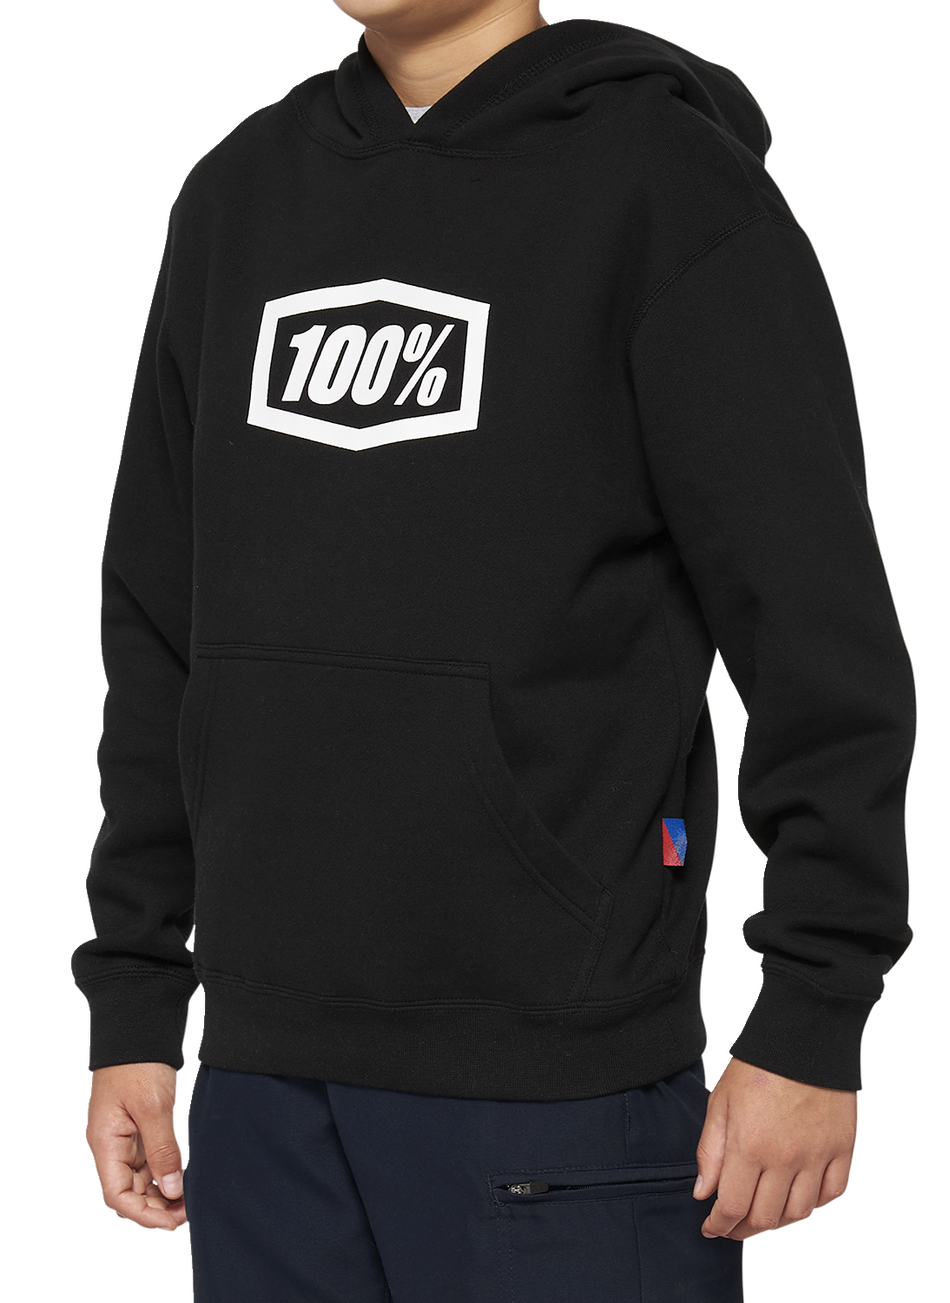 100% Youth Icon Hoodie - Black - Small 20030-00000